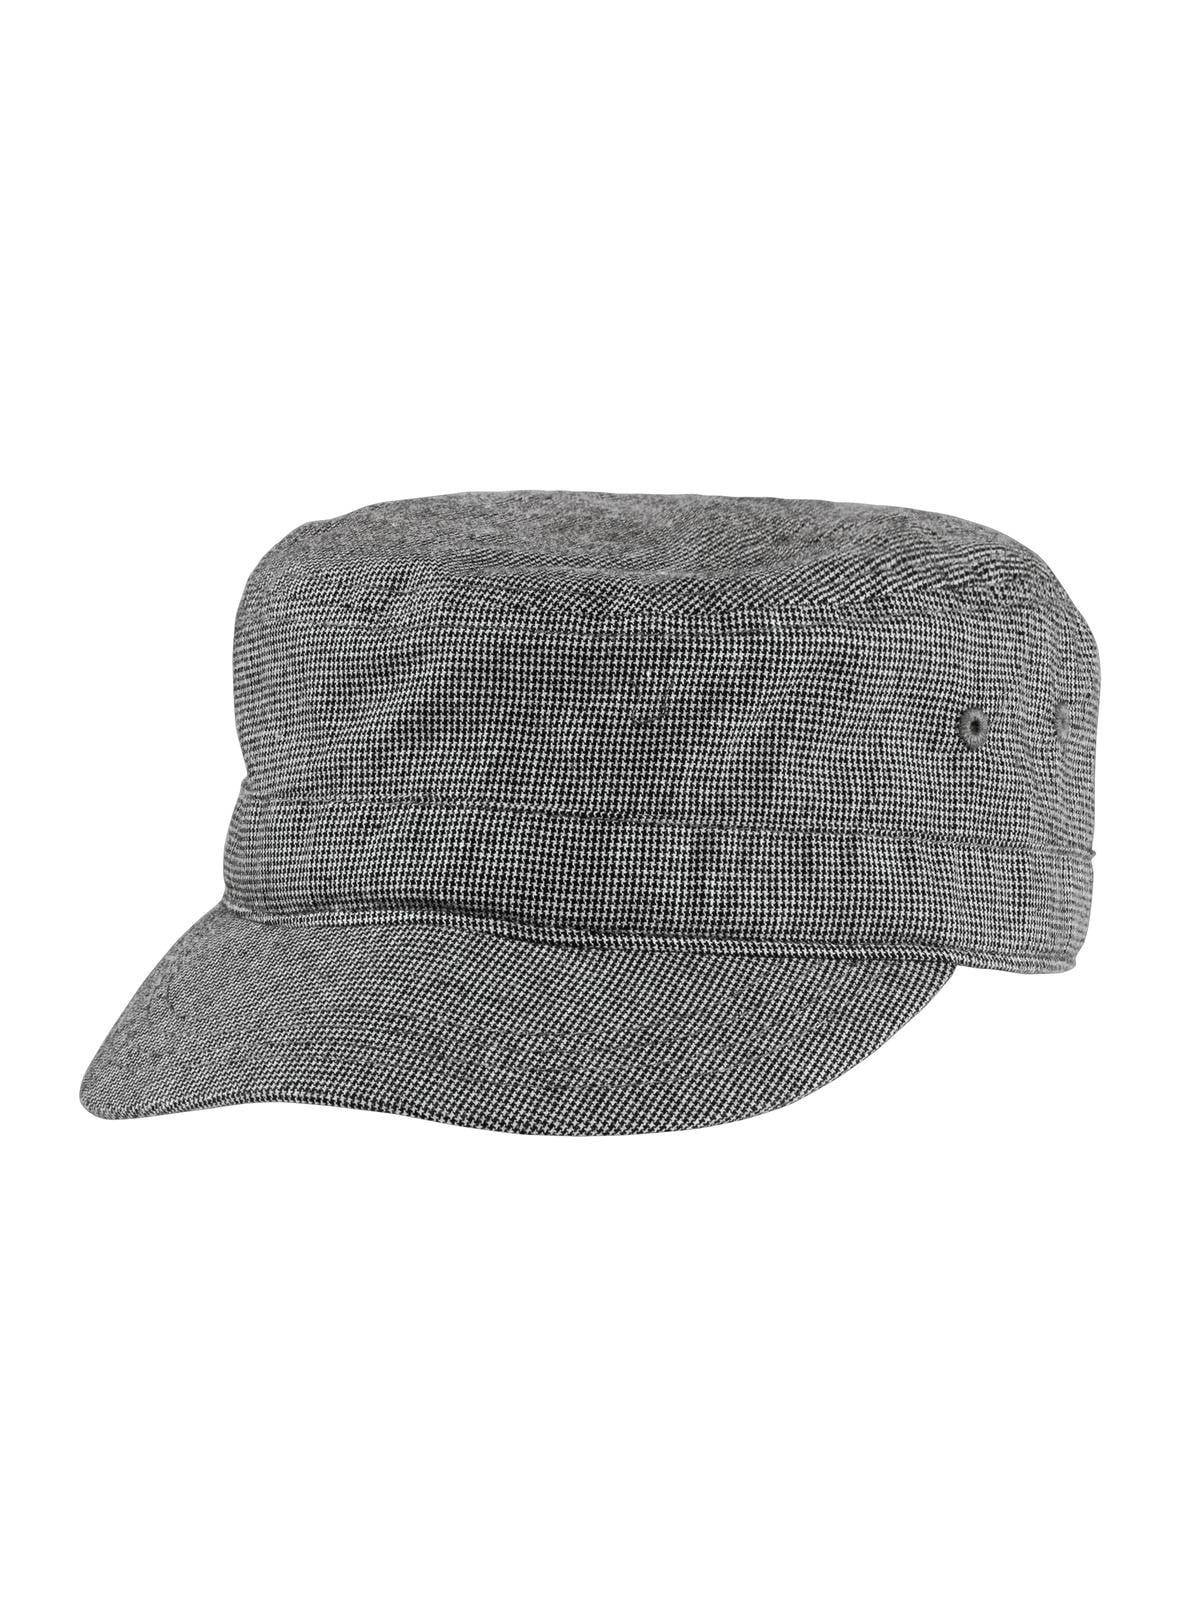 TOP HEADWEAR Houndstooth Military Hat 